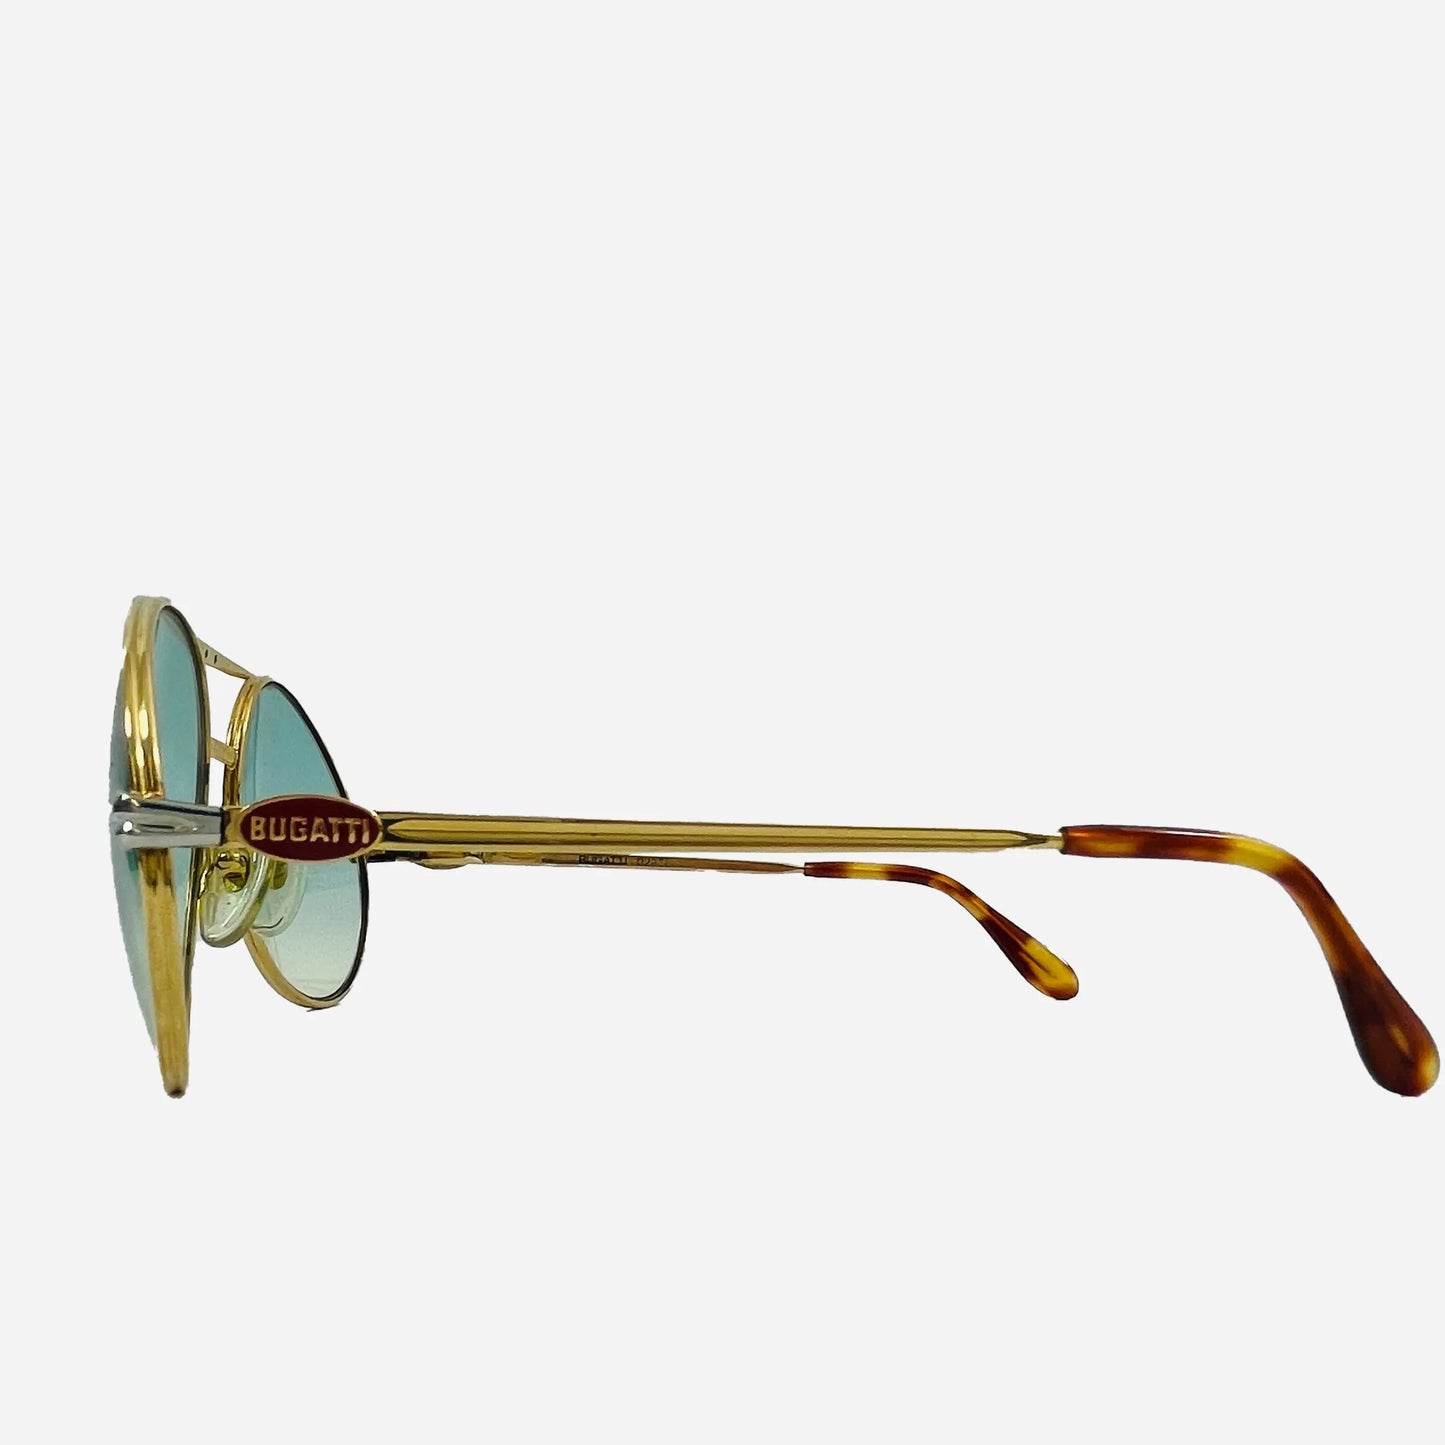 Ettore-Bugatti-Sonnenbrille-Sunglasses-Gold-Plated-14CT-the-seekers-side